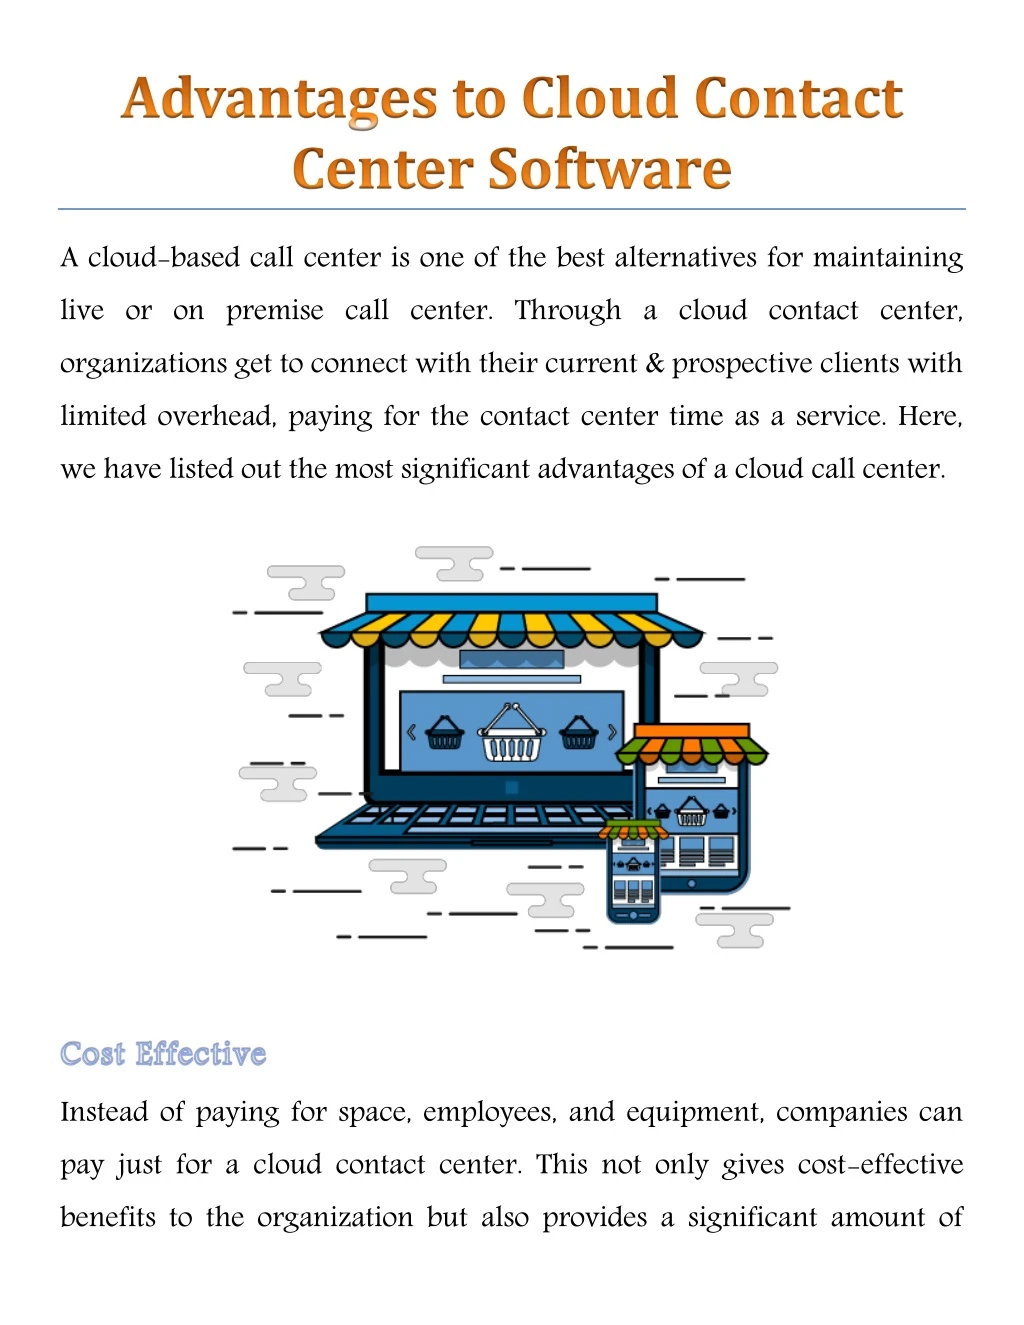 a cloud based call center is one of the best